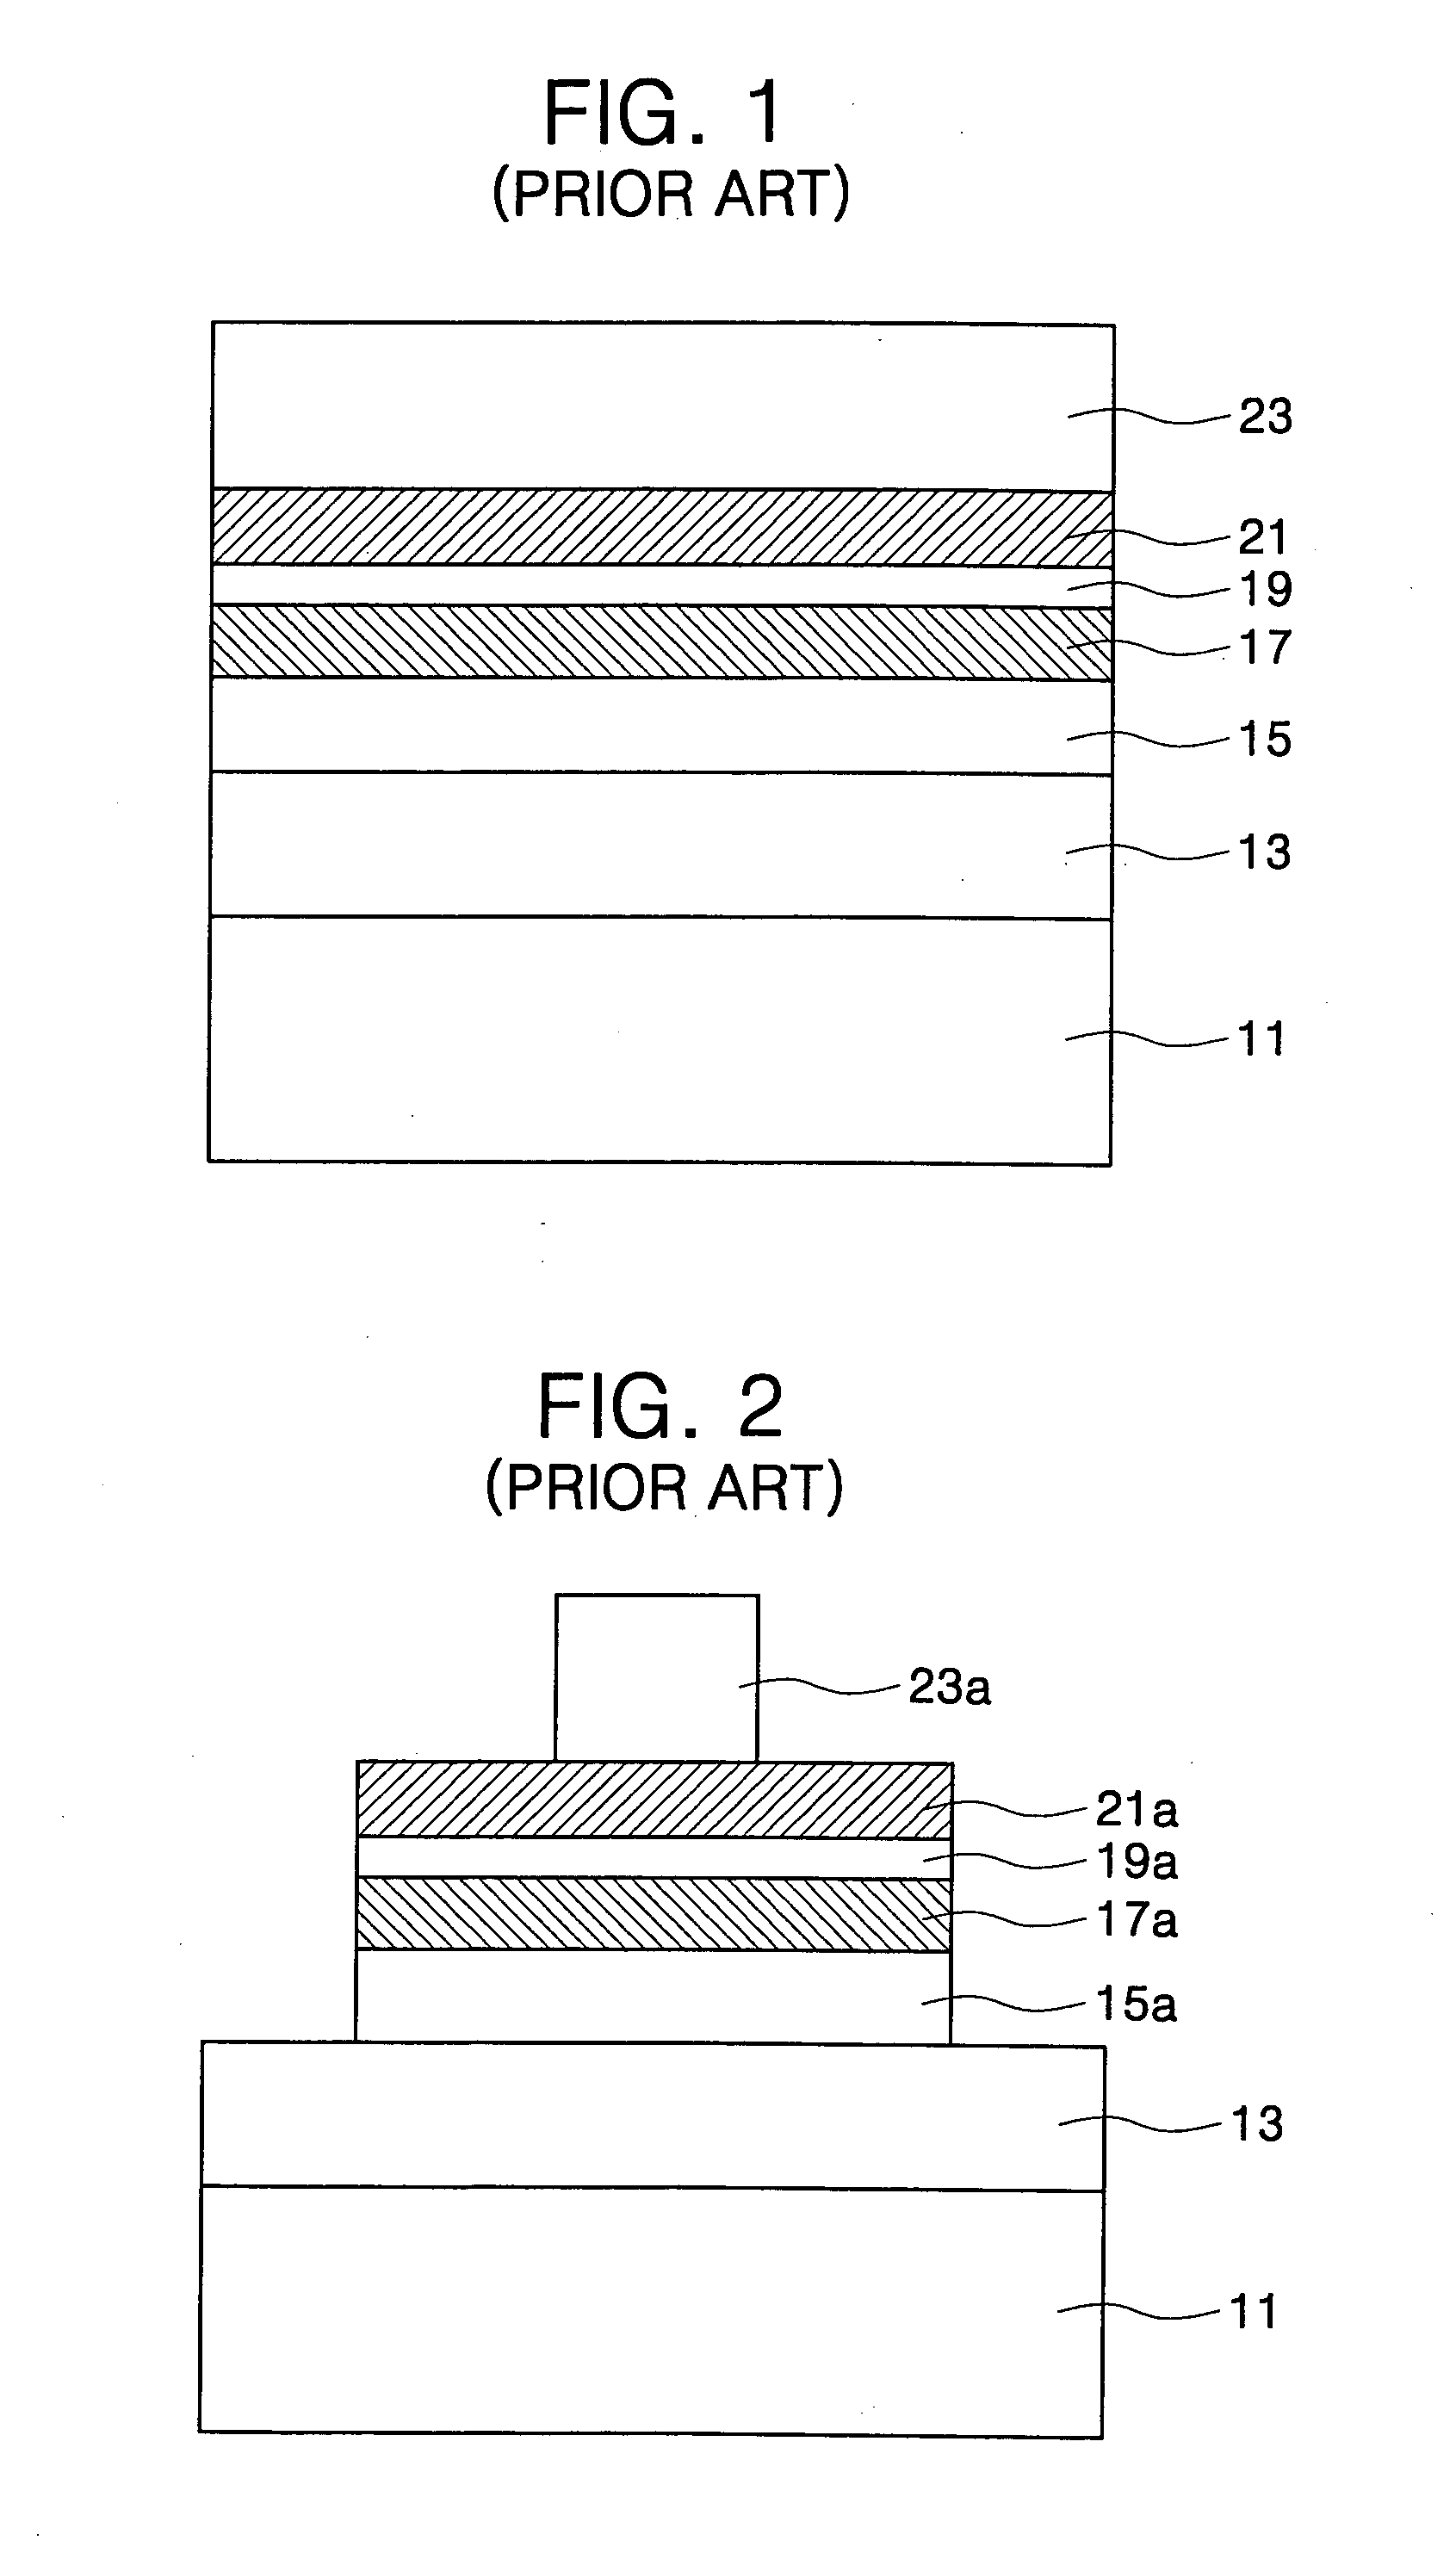 Magnetic tunnel junction structure having an oxidized buffer layer and method of fabricating the same